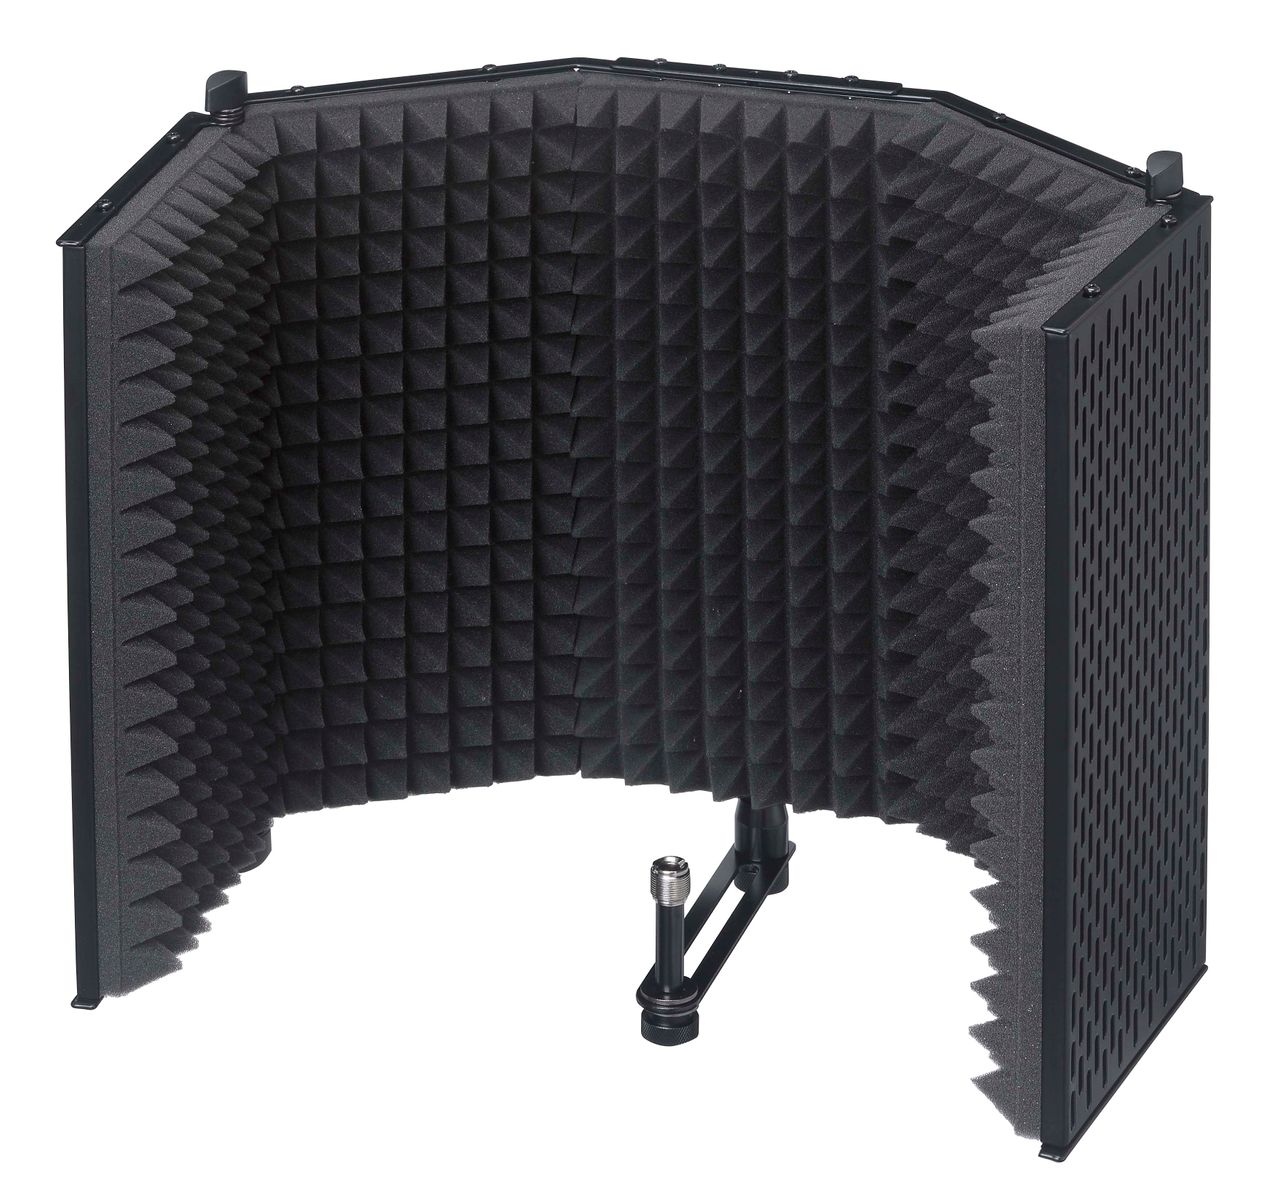 The Tascam TM-AR1 Acoustic Control Filter is available at Hollywood Sound Systems.